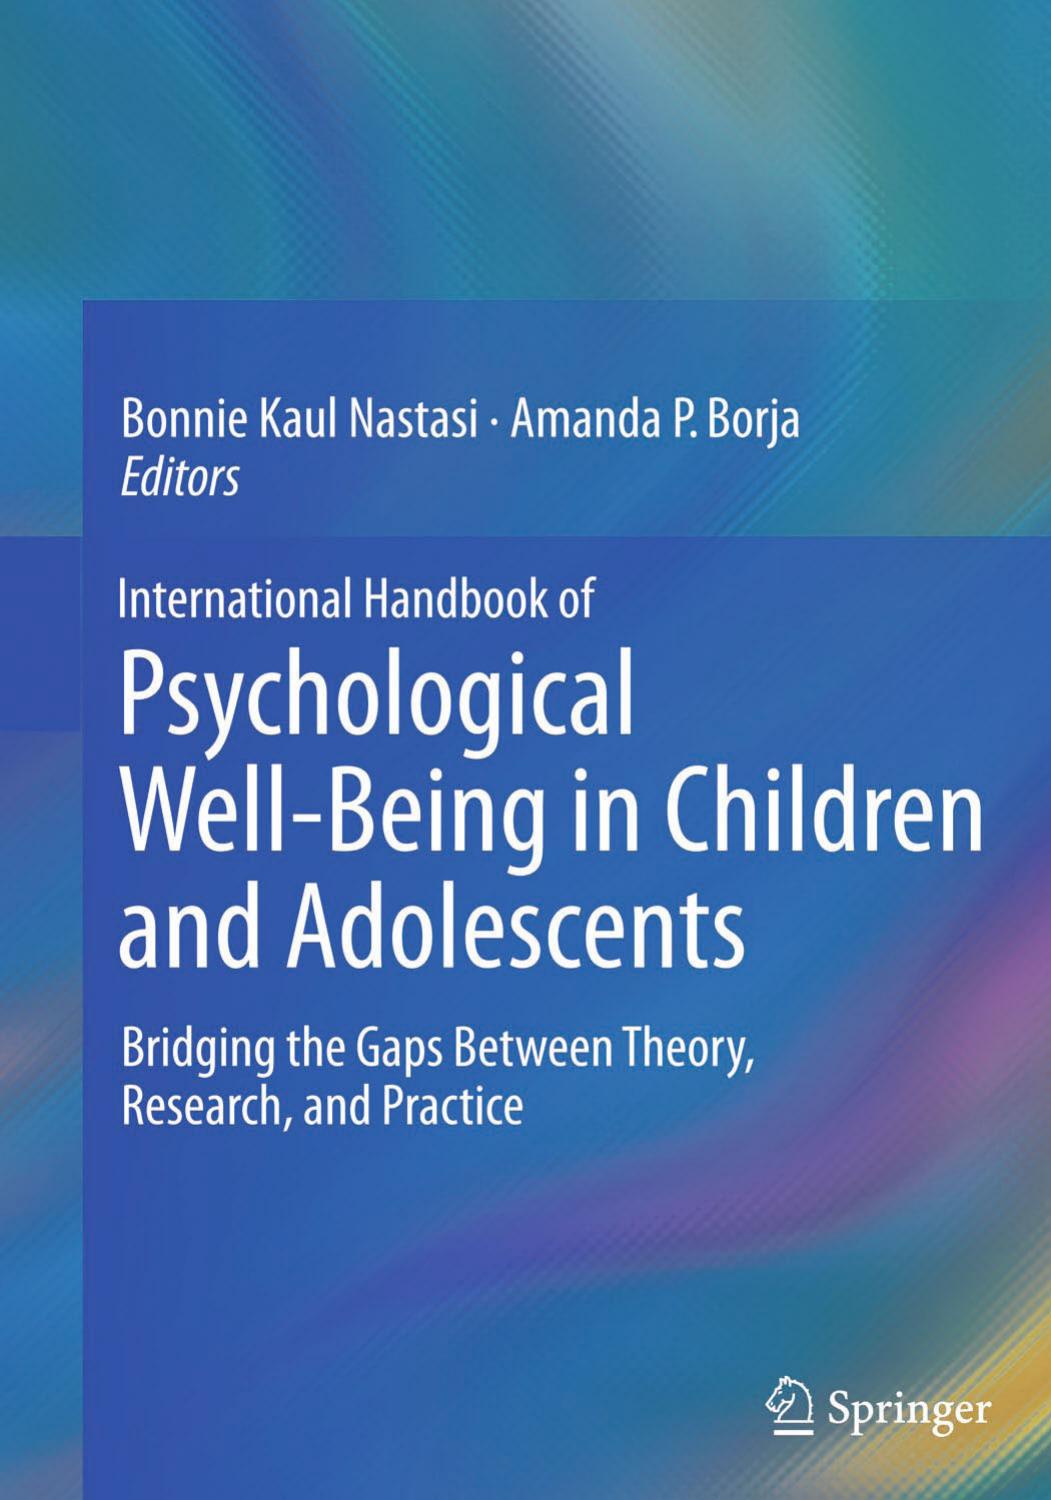 International Handbook of Psychological Well-Being in Children and Adolescents Bridging the Gaps 2016